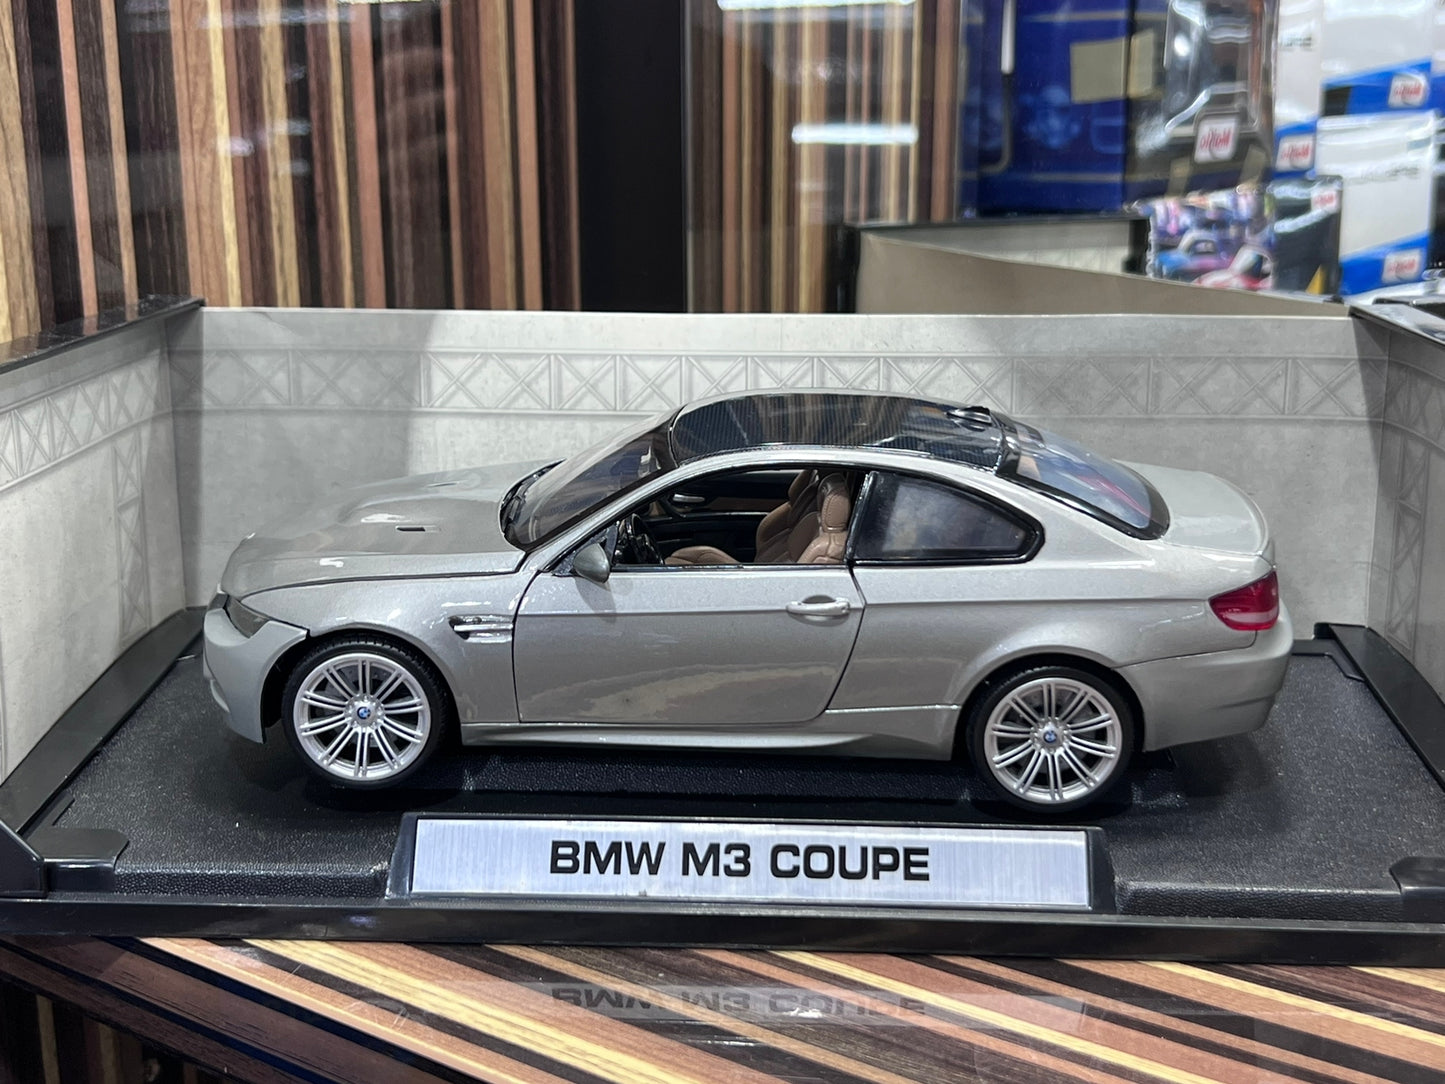 BMW M3 Coupe 1/18 Diecast car by Motormax